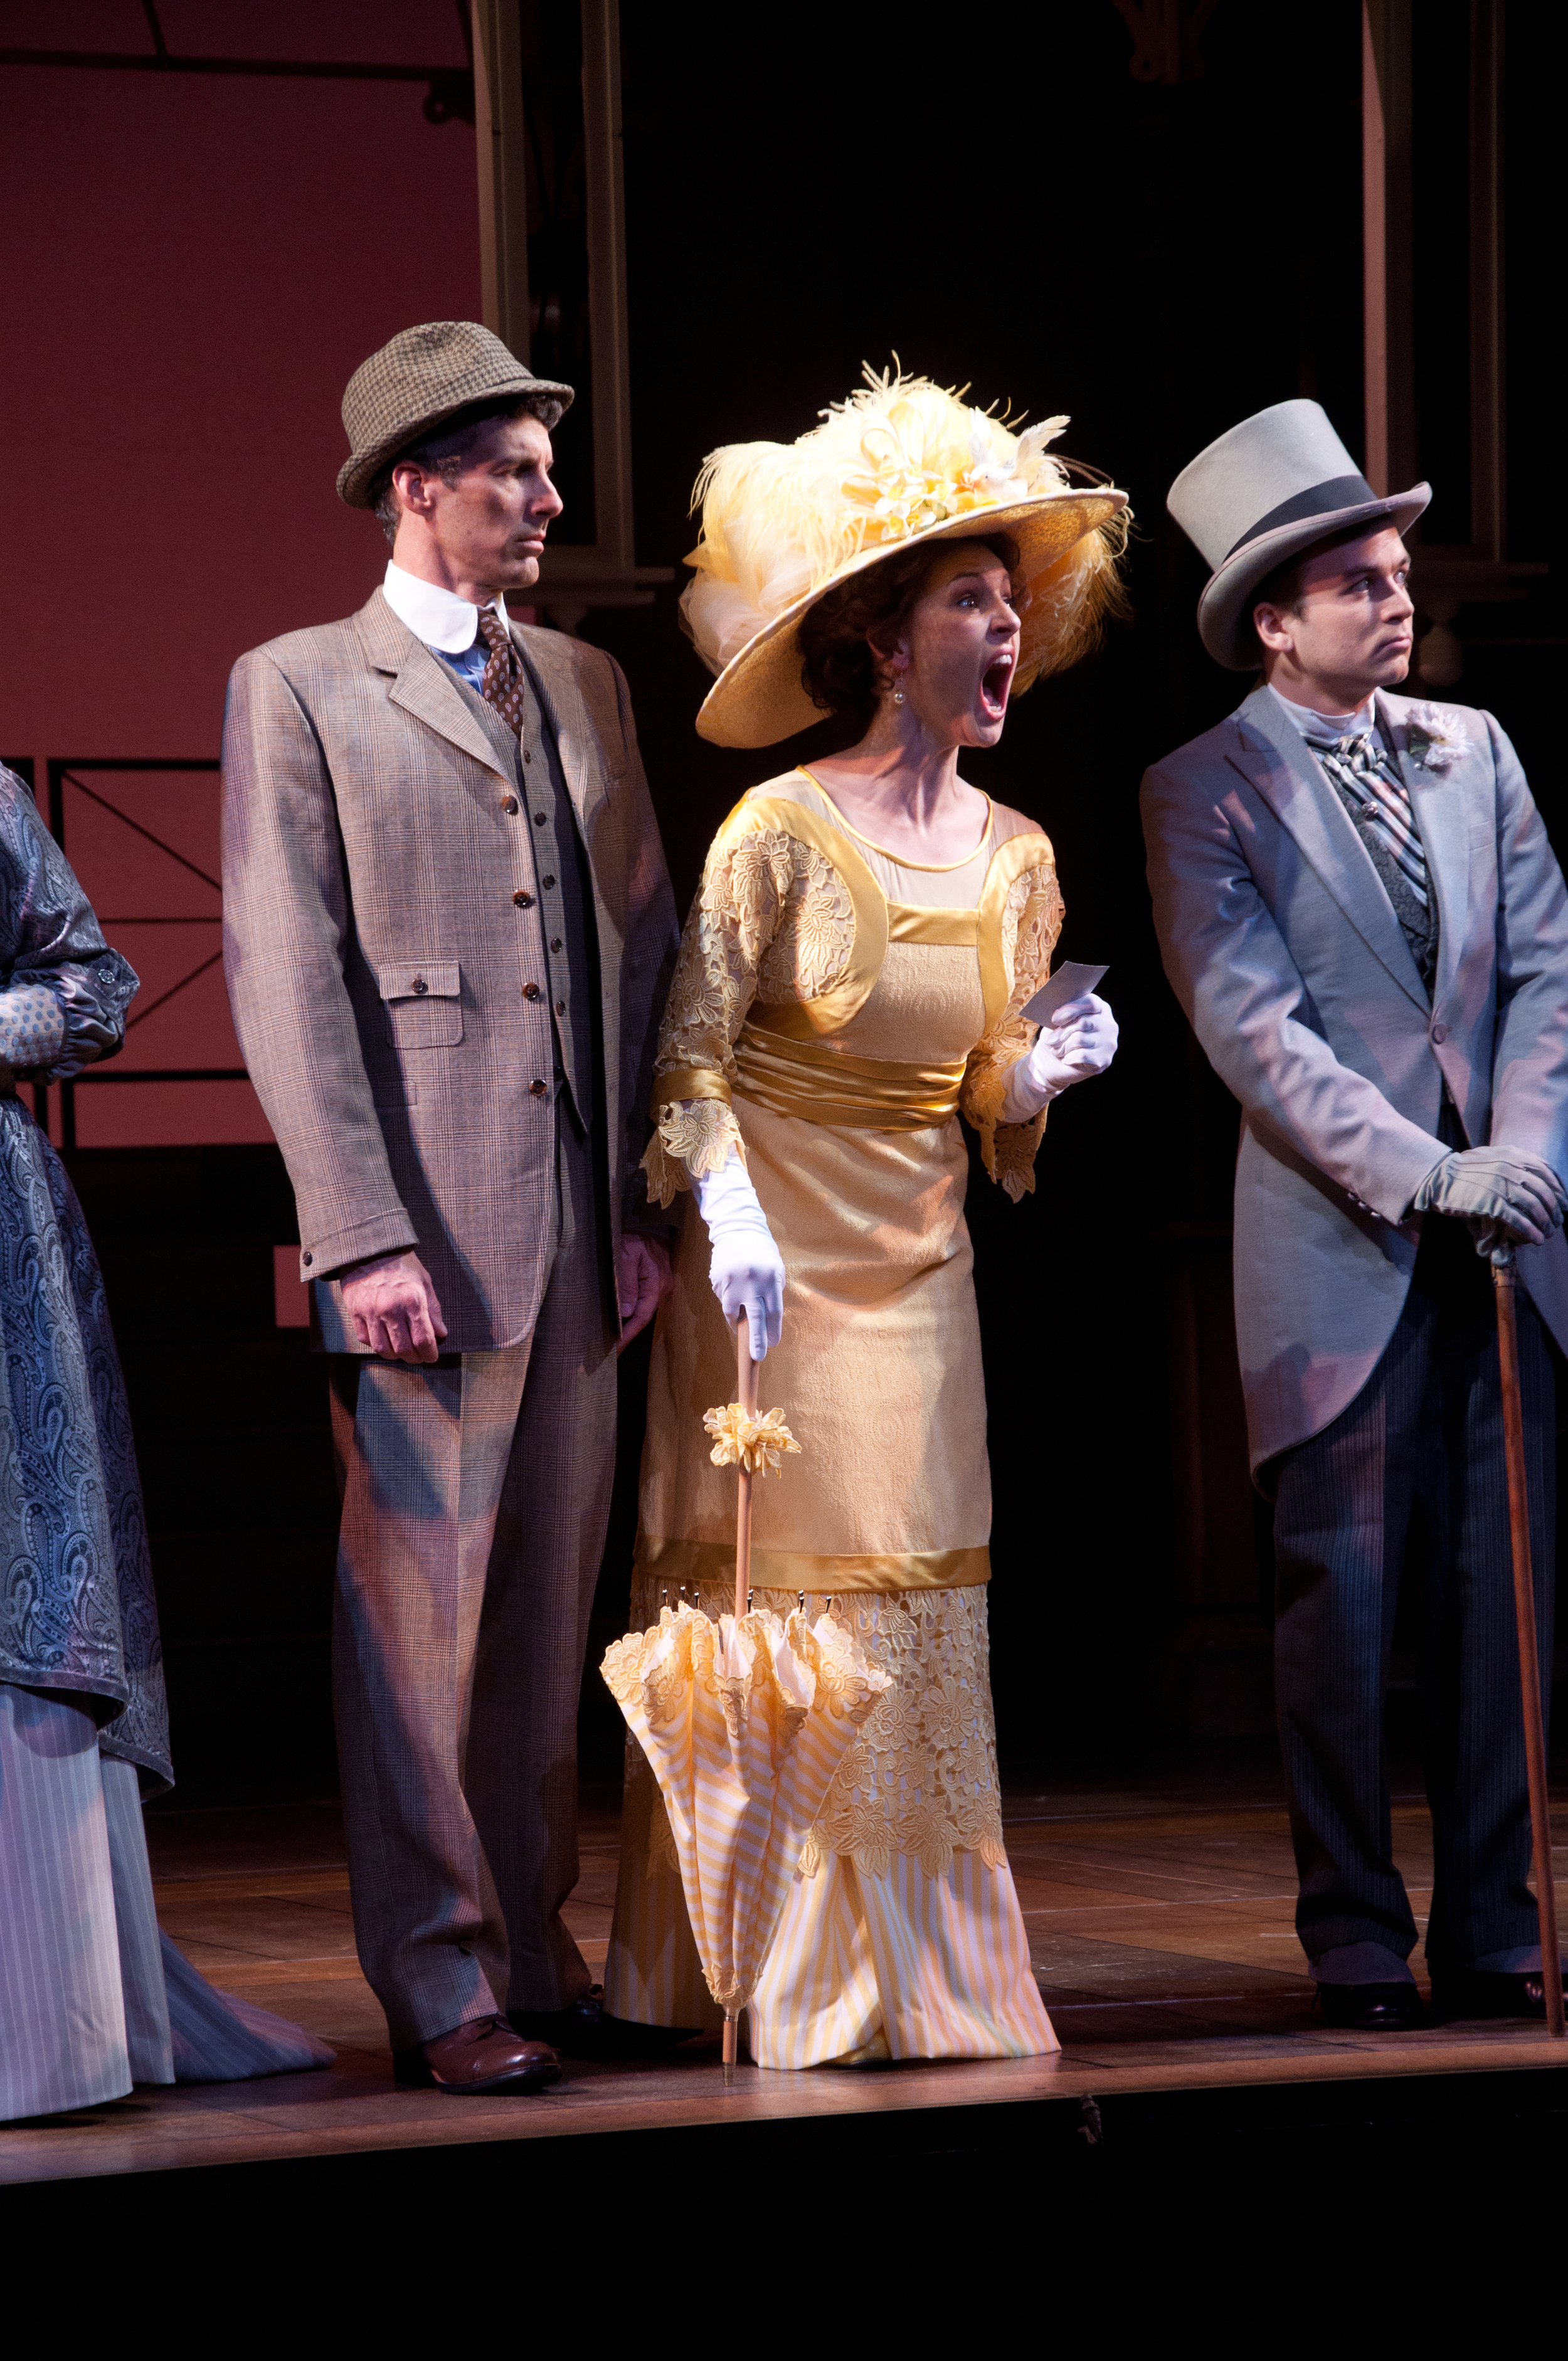 as-eliza-doolittle-in-my-fair-lady-with-jeff-parker-and-sean-effinger-dean_6960998703_o.jpg